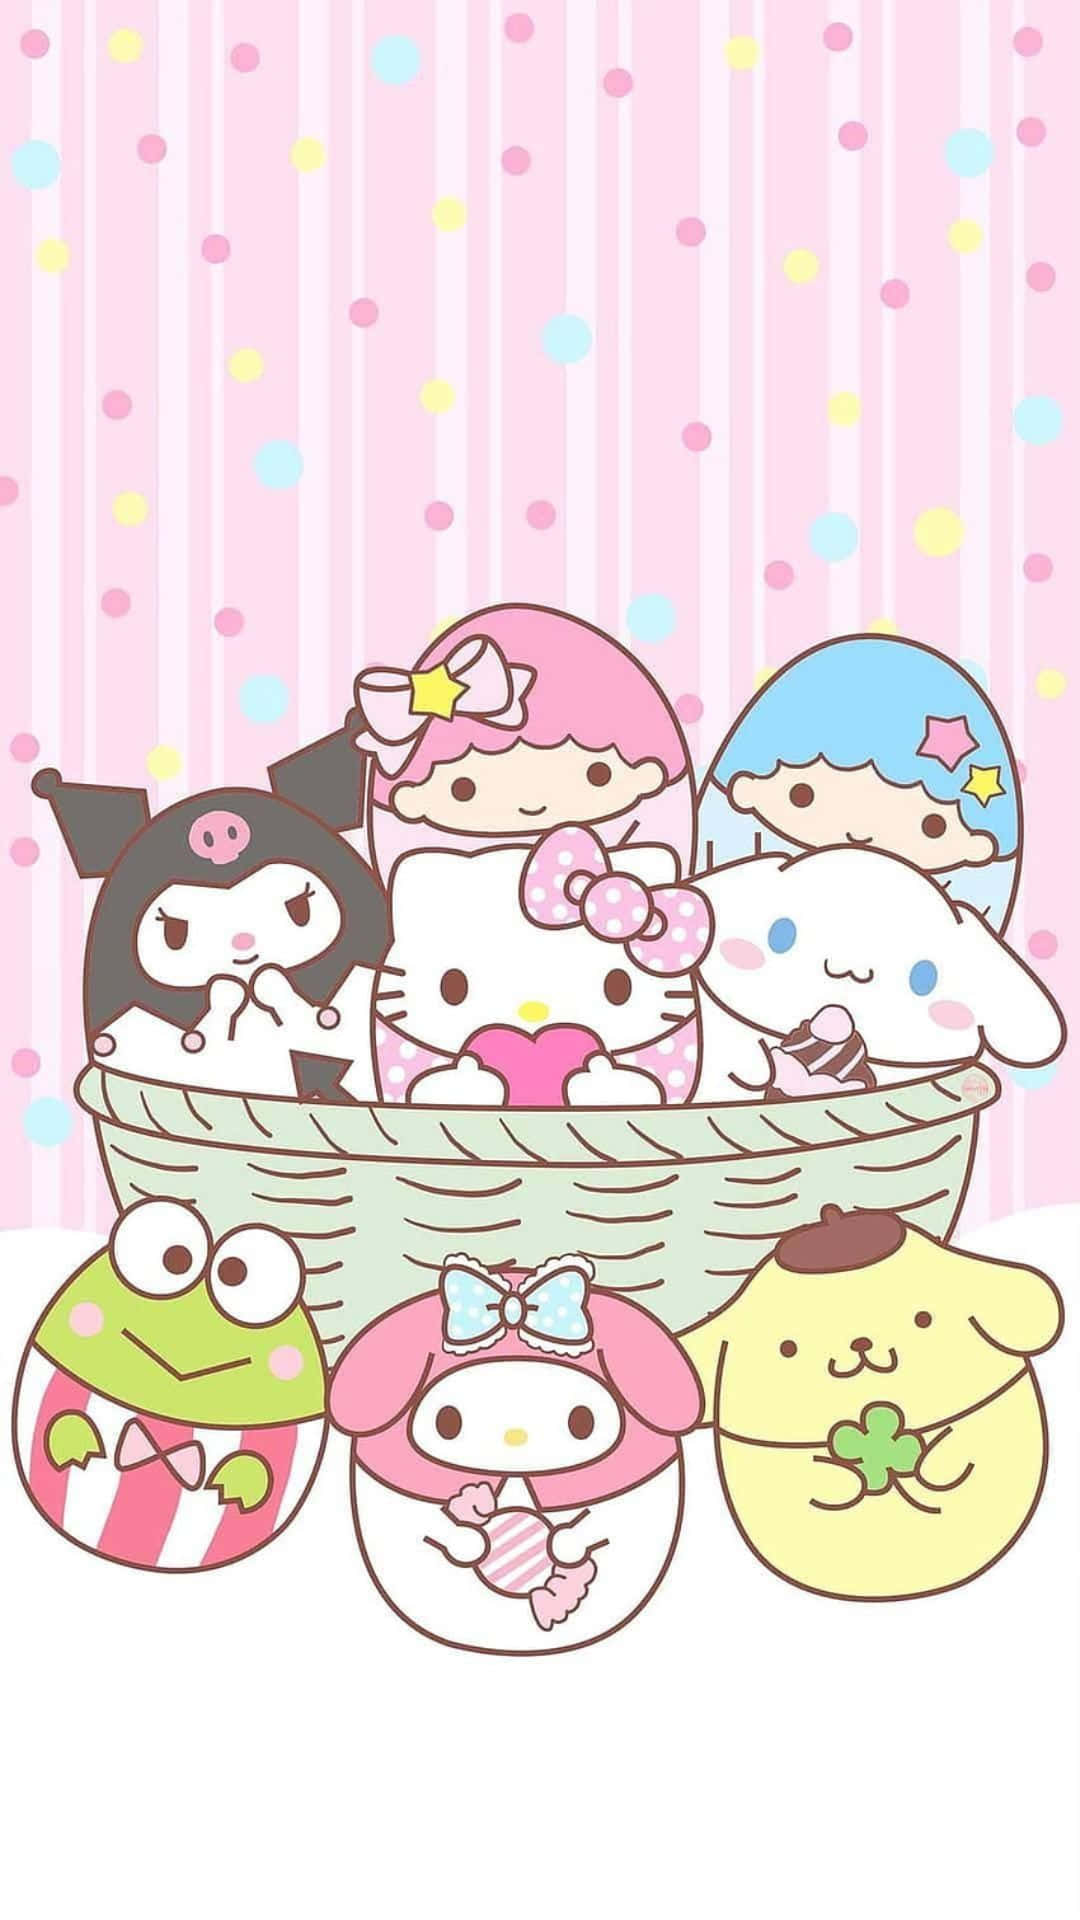 Cute Kawaii Characters on a Pastel Background Wallpaper